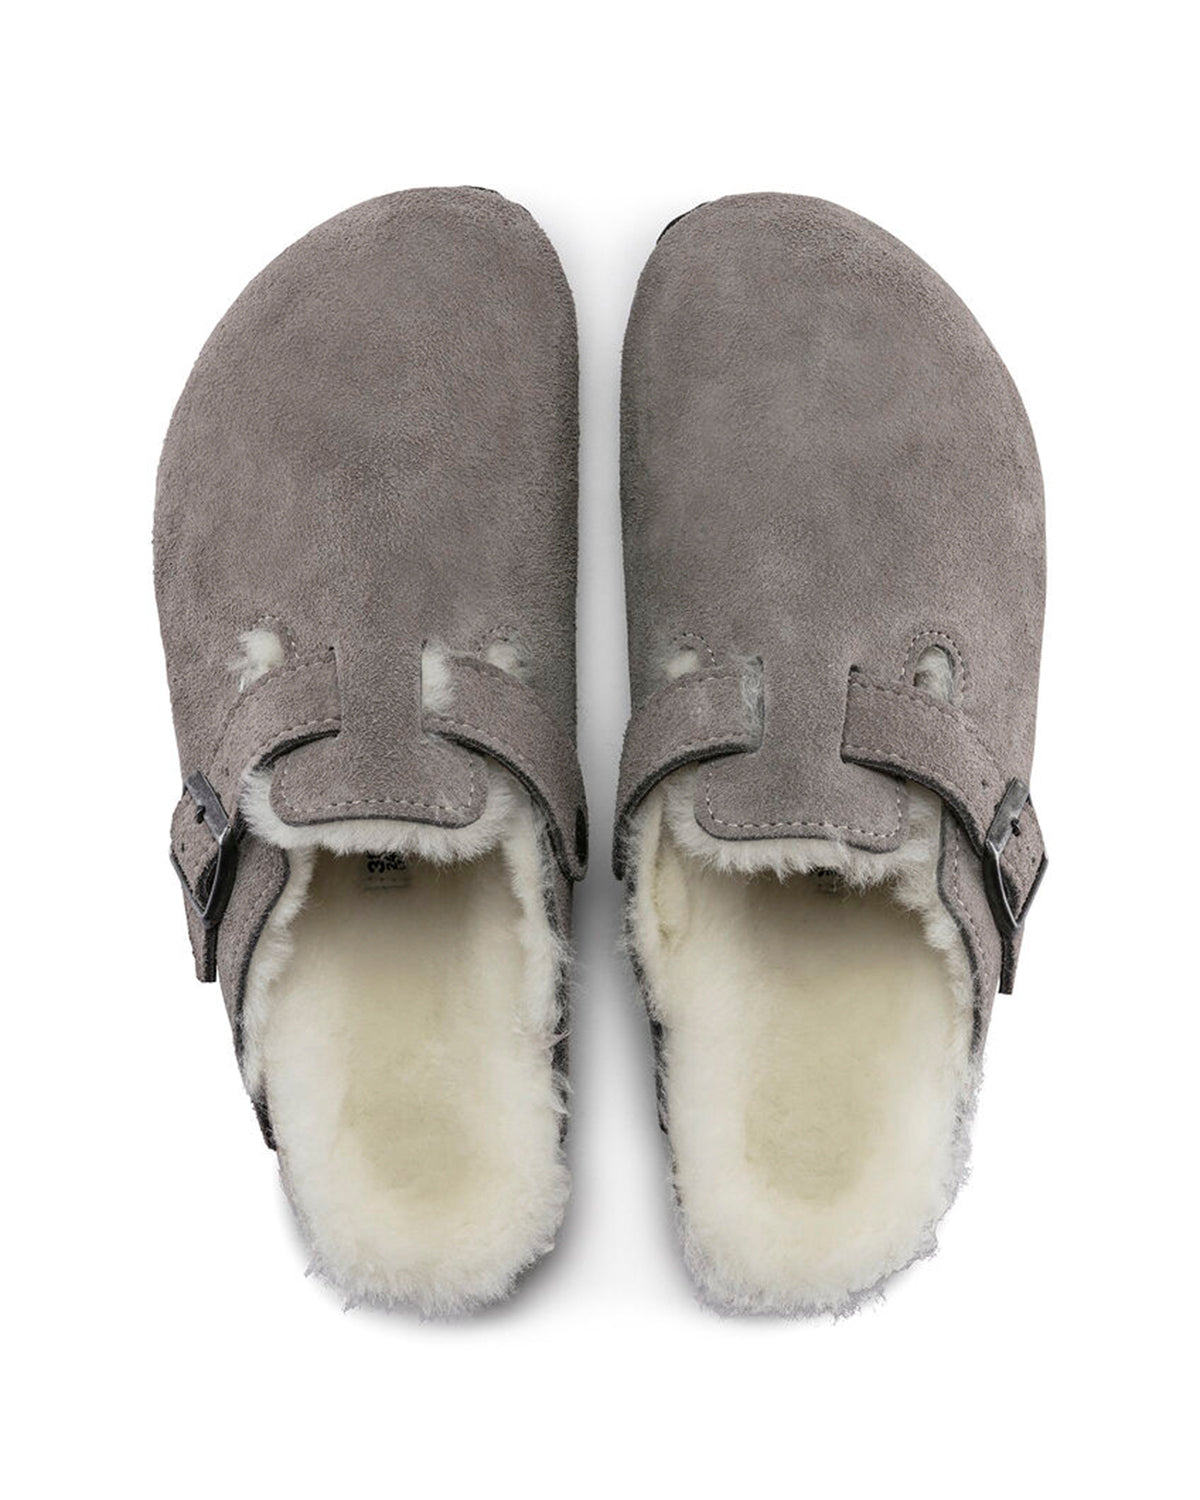 Birkenstock Boston Stone Coin Shearling Shoes Leather Unisex